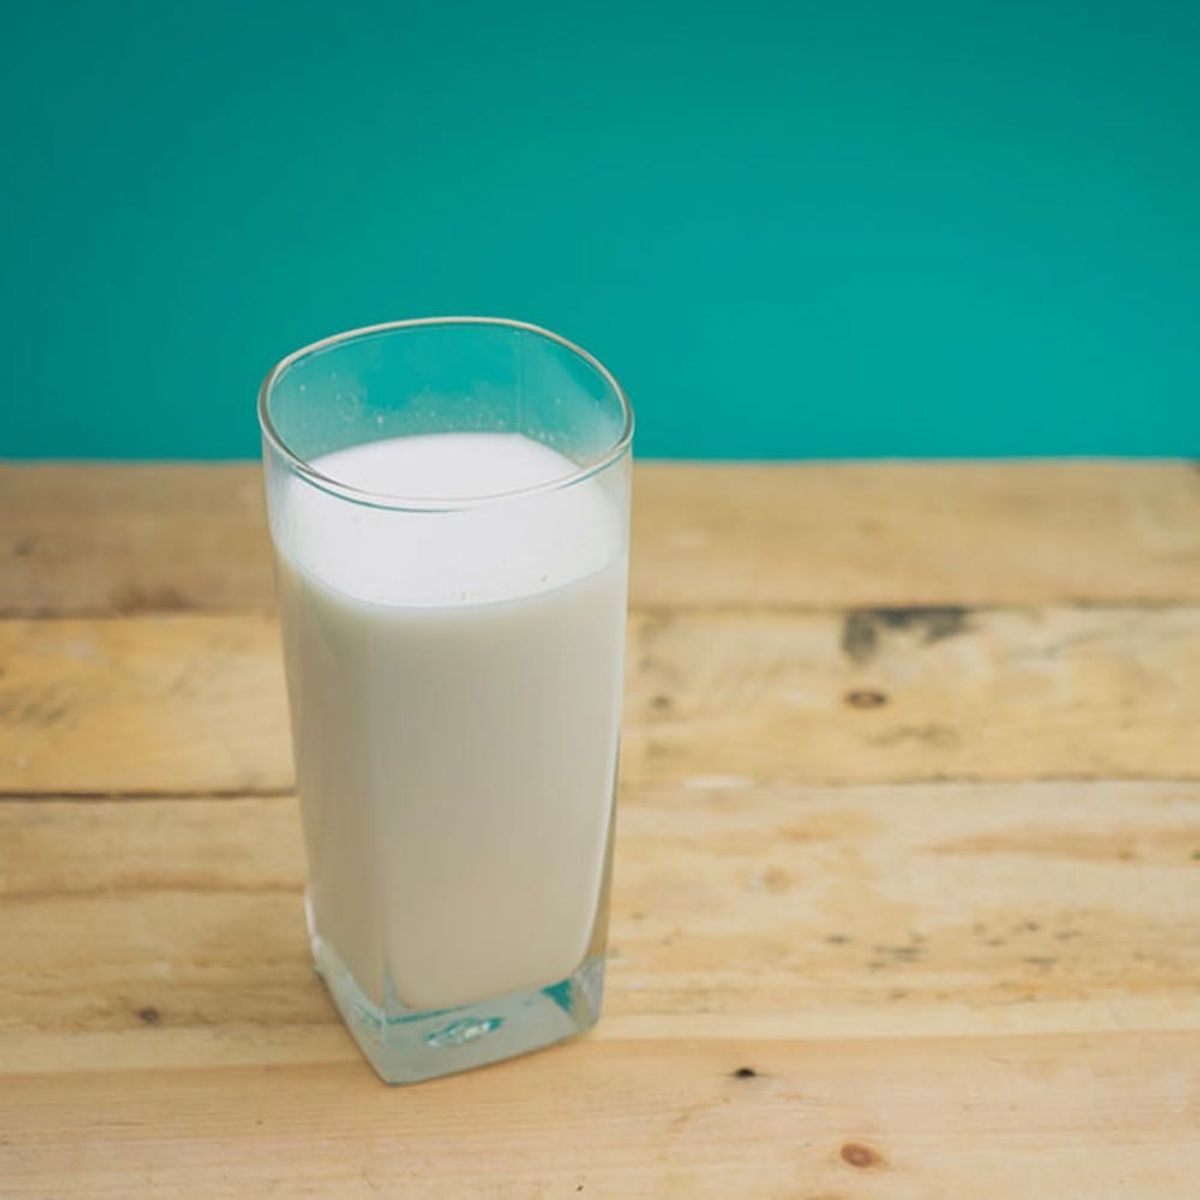 Full-Fat Dairy Is Healthier for You Than You Think